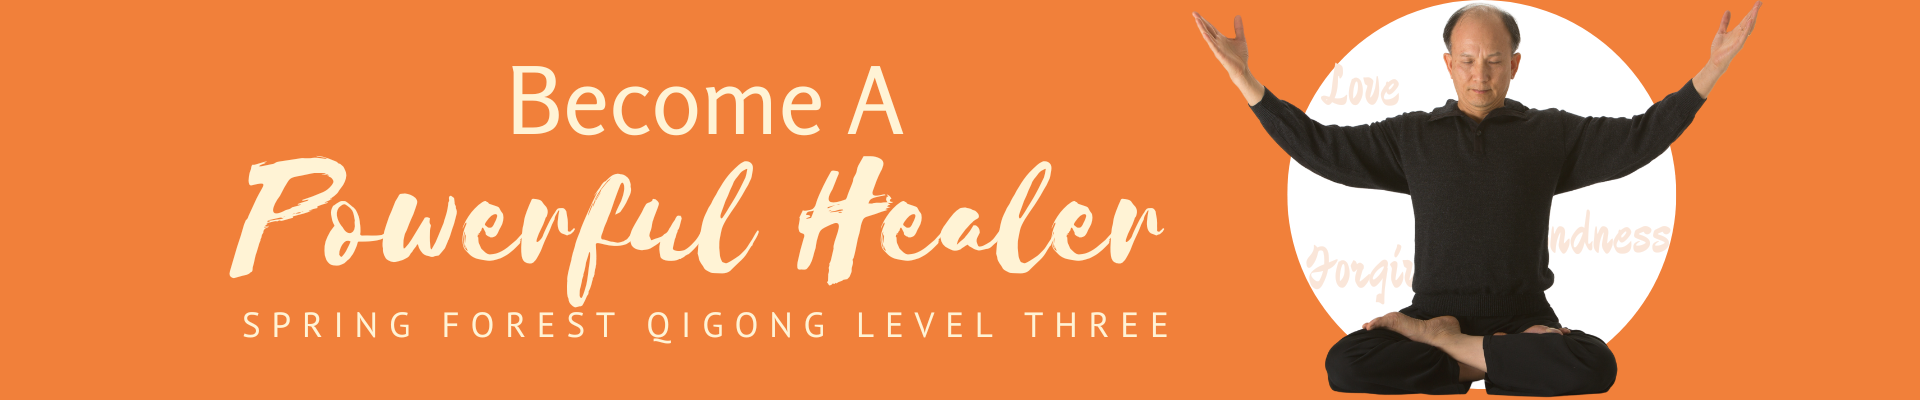 Spring Forest Qigong Level Three - Becoming A Powerful Healer